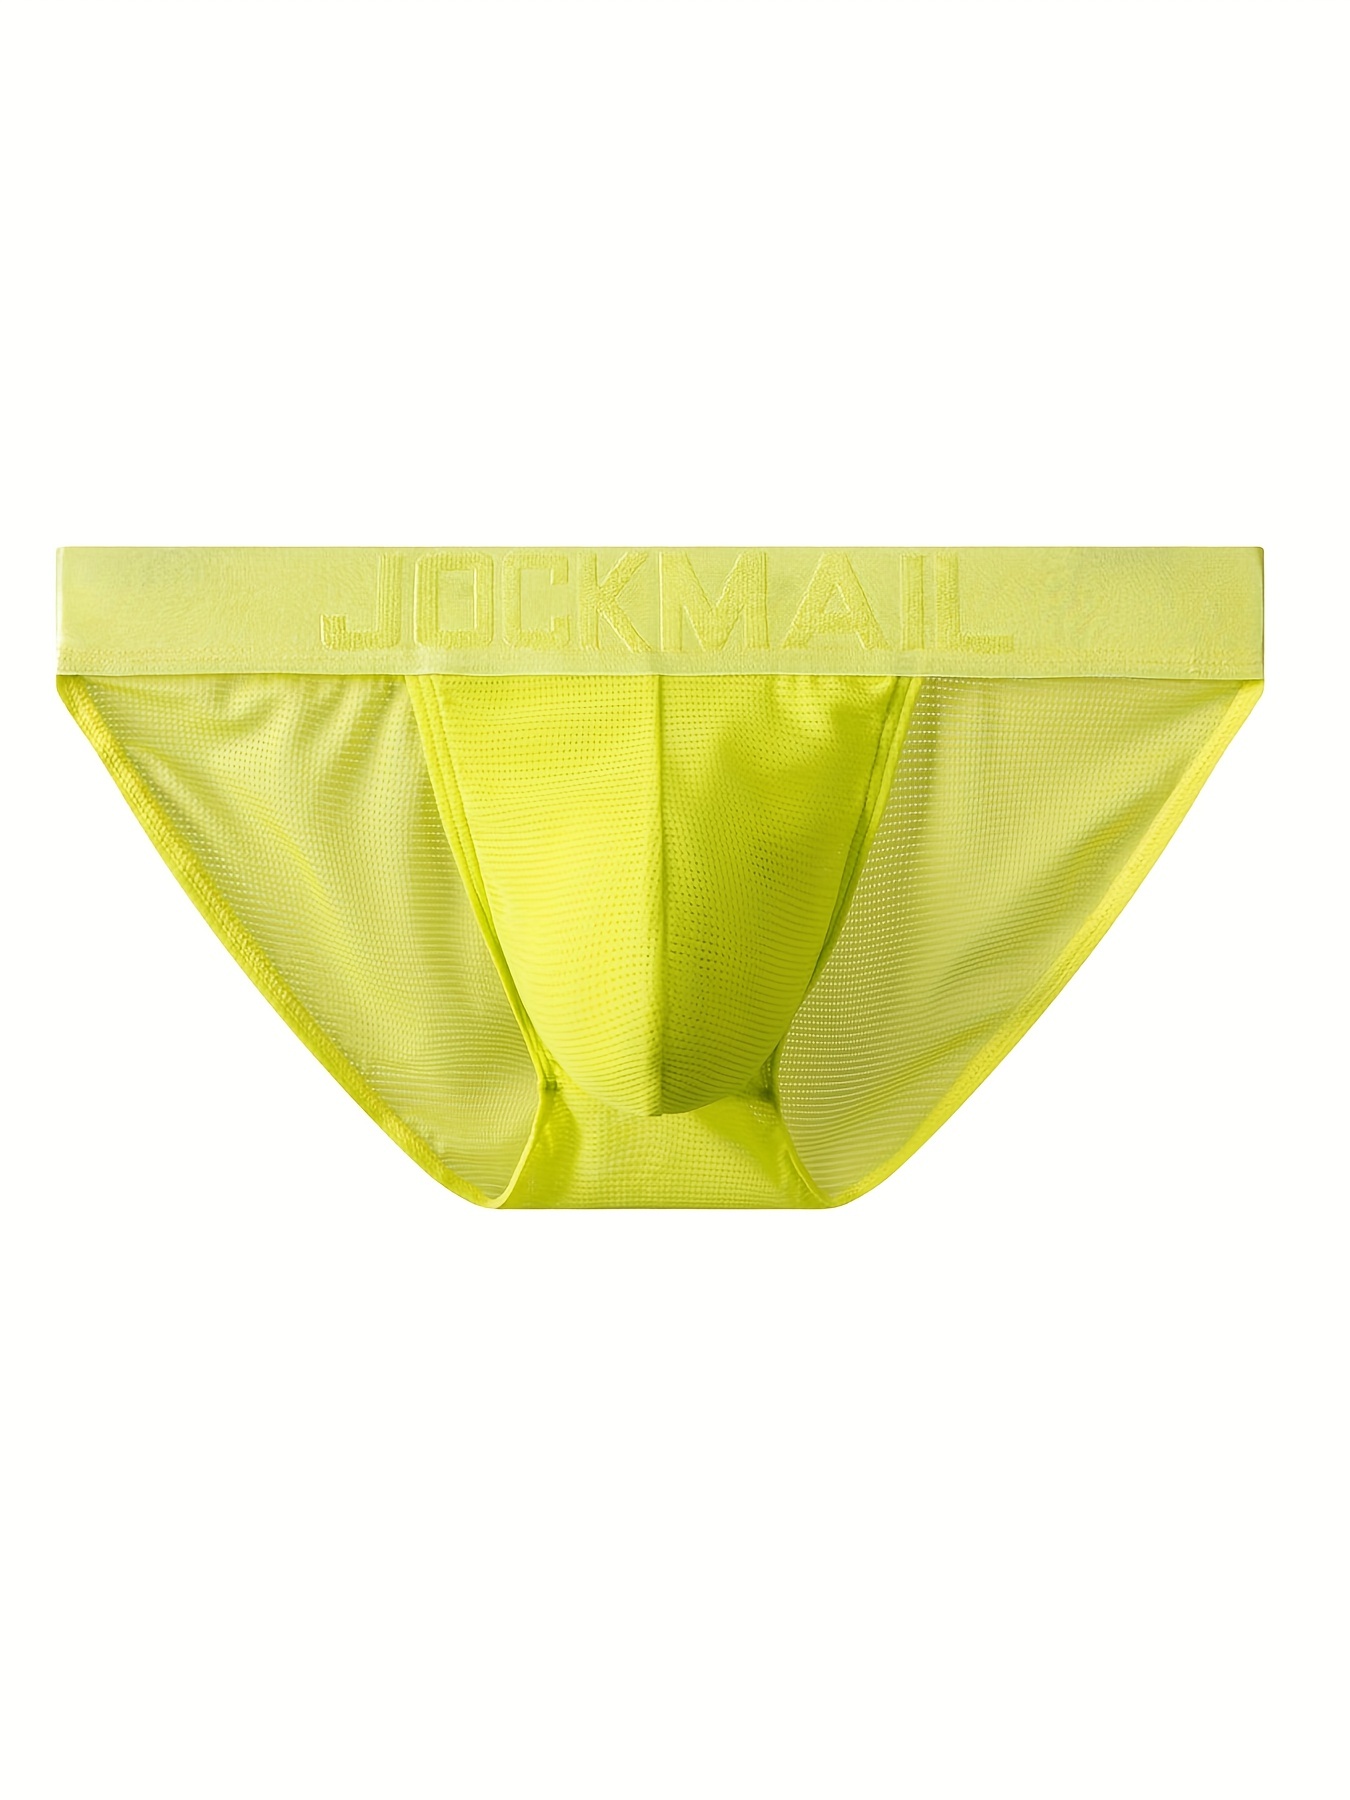 Stance Yellow Underwear for Men for sale